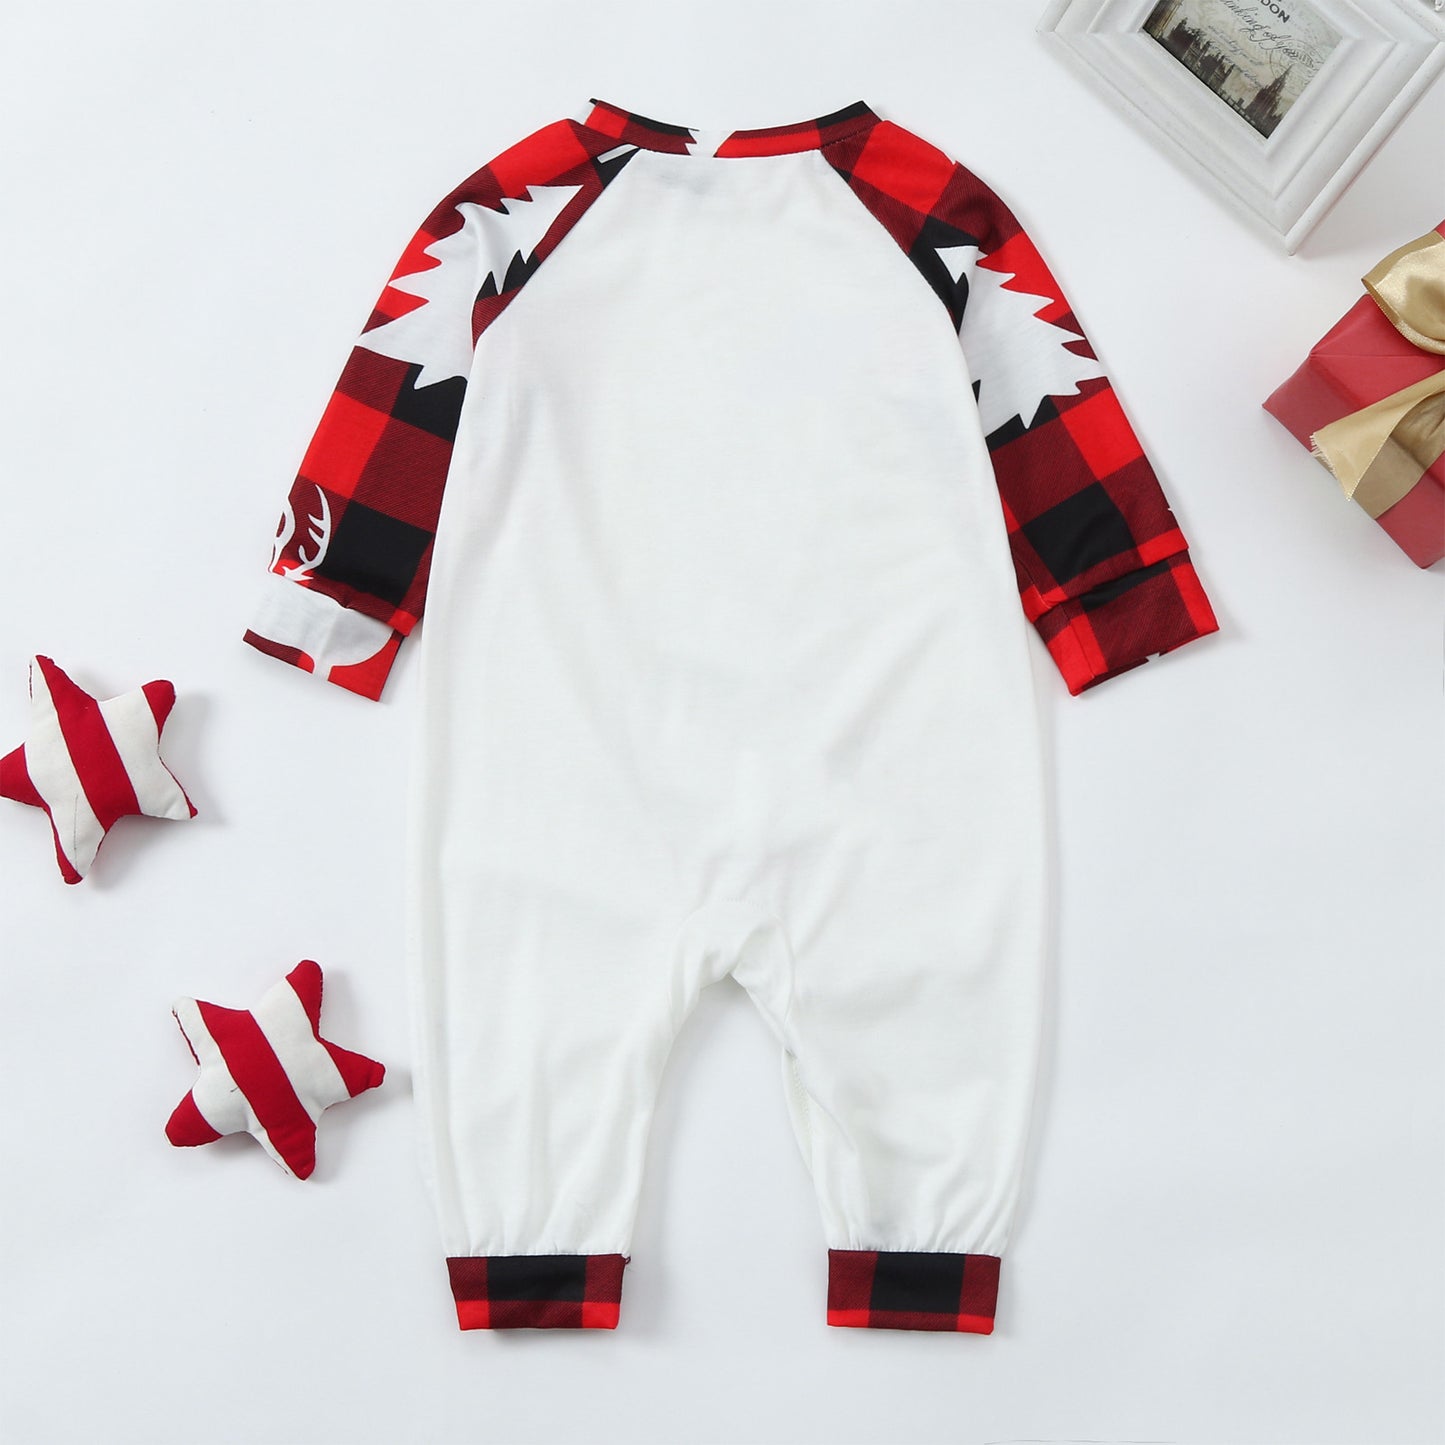 Merry Christmas Deer White and Red Plaid Christmas matching PJS set.